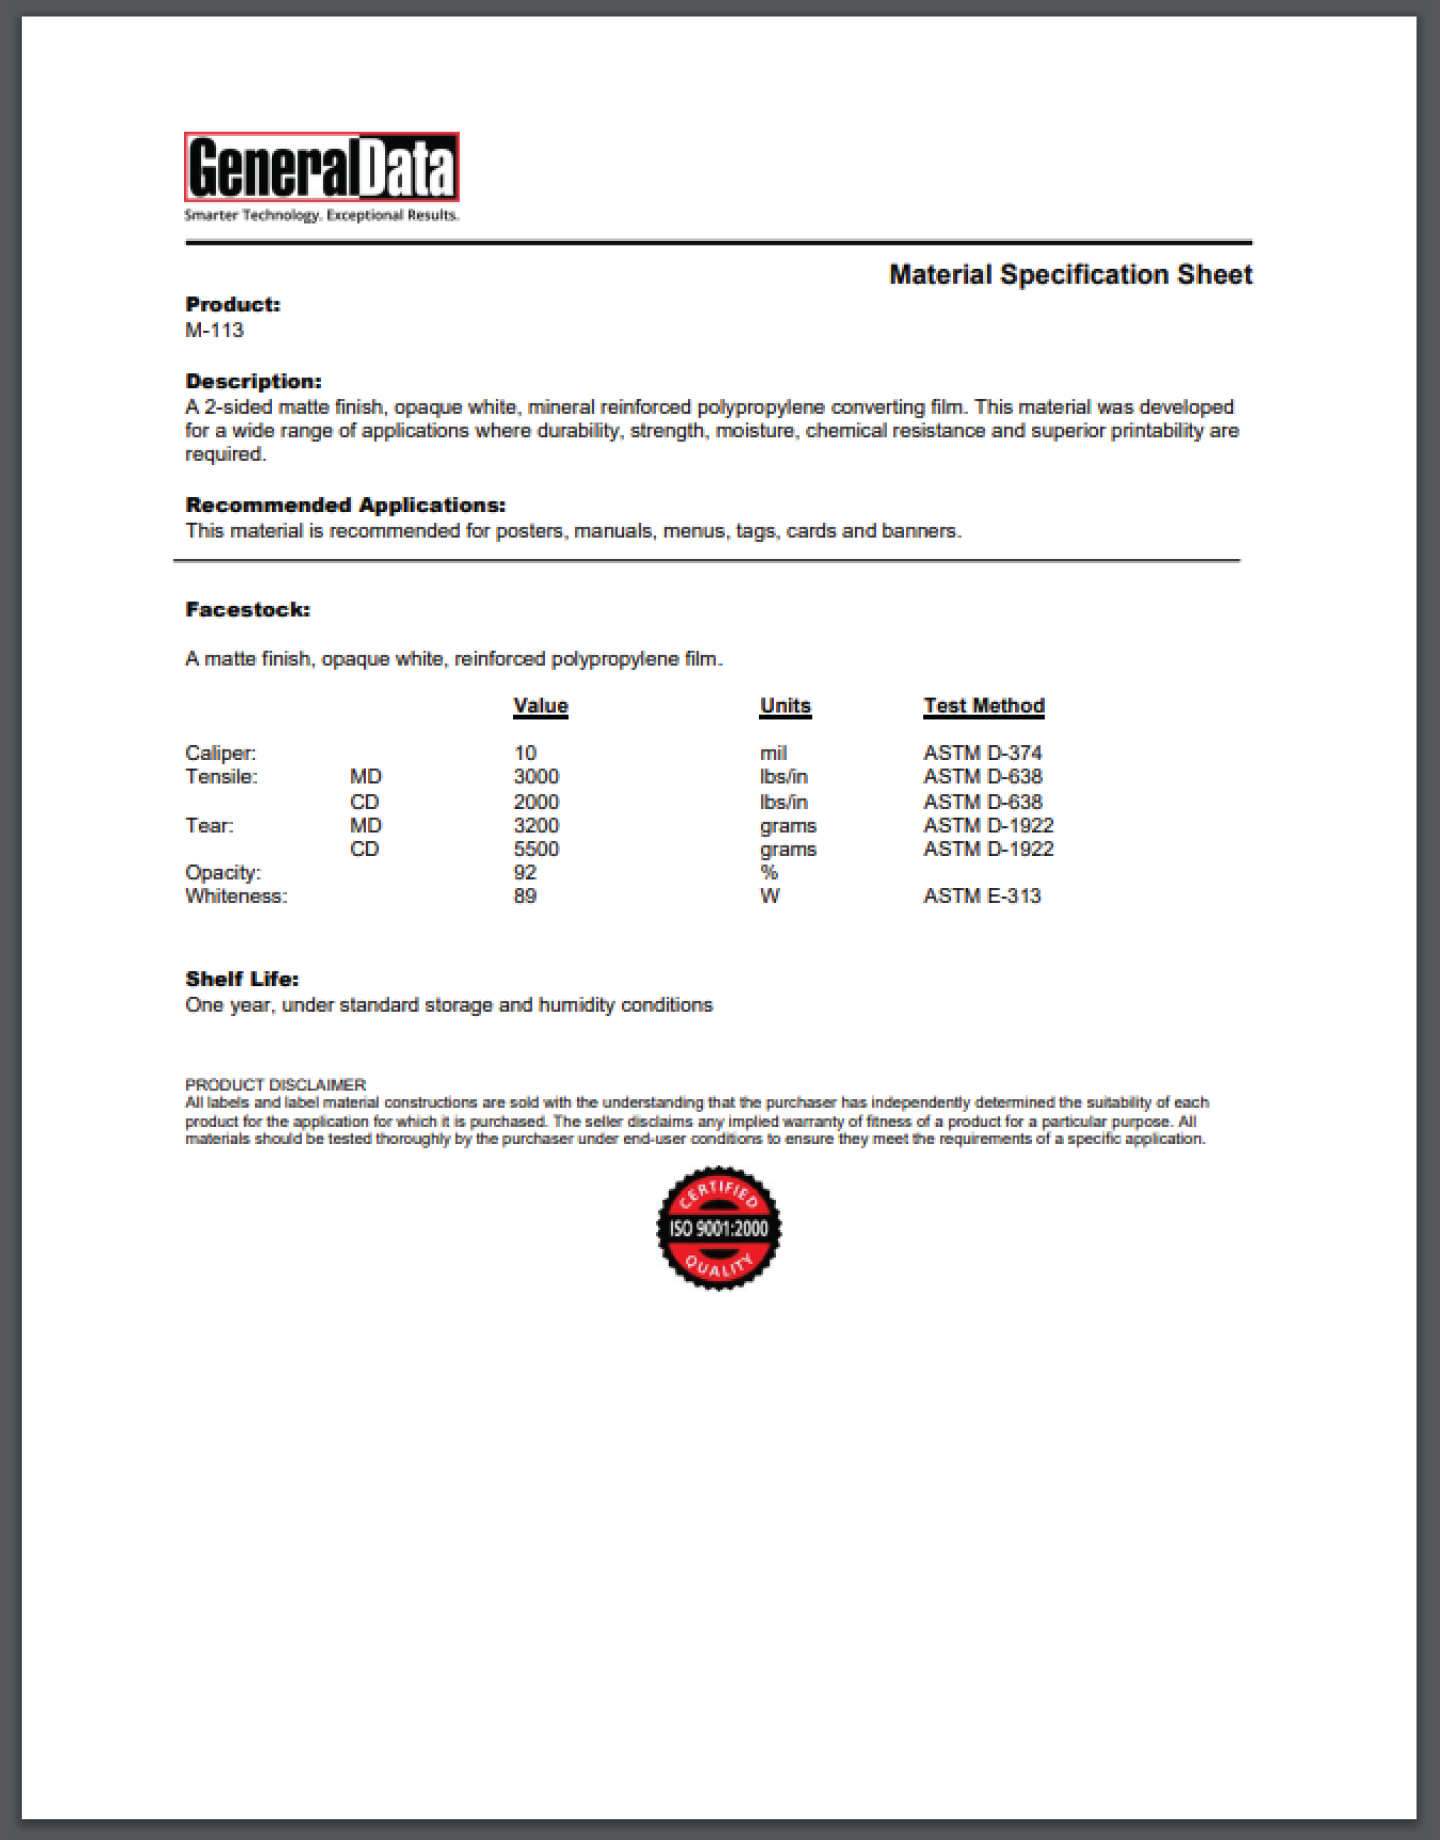 M-113 Material Specification Sheet